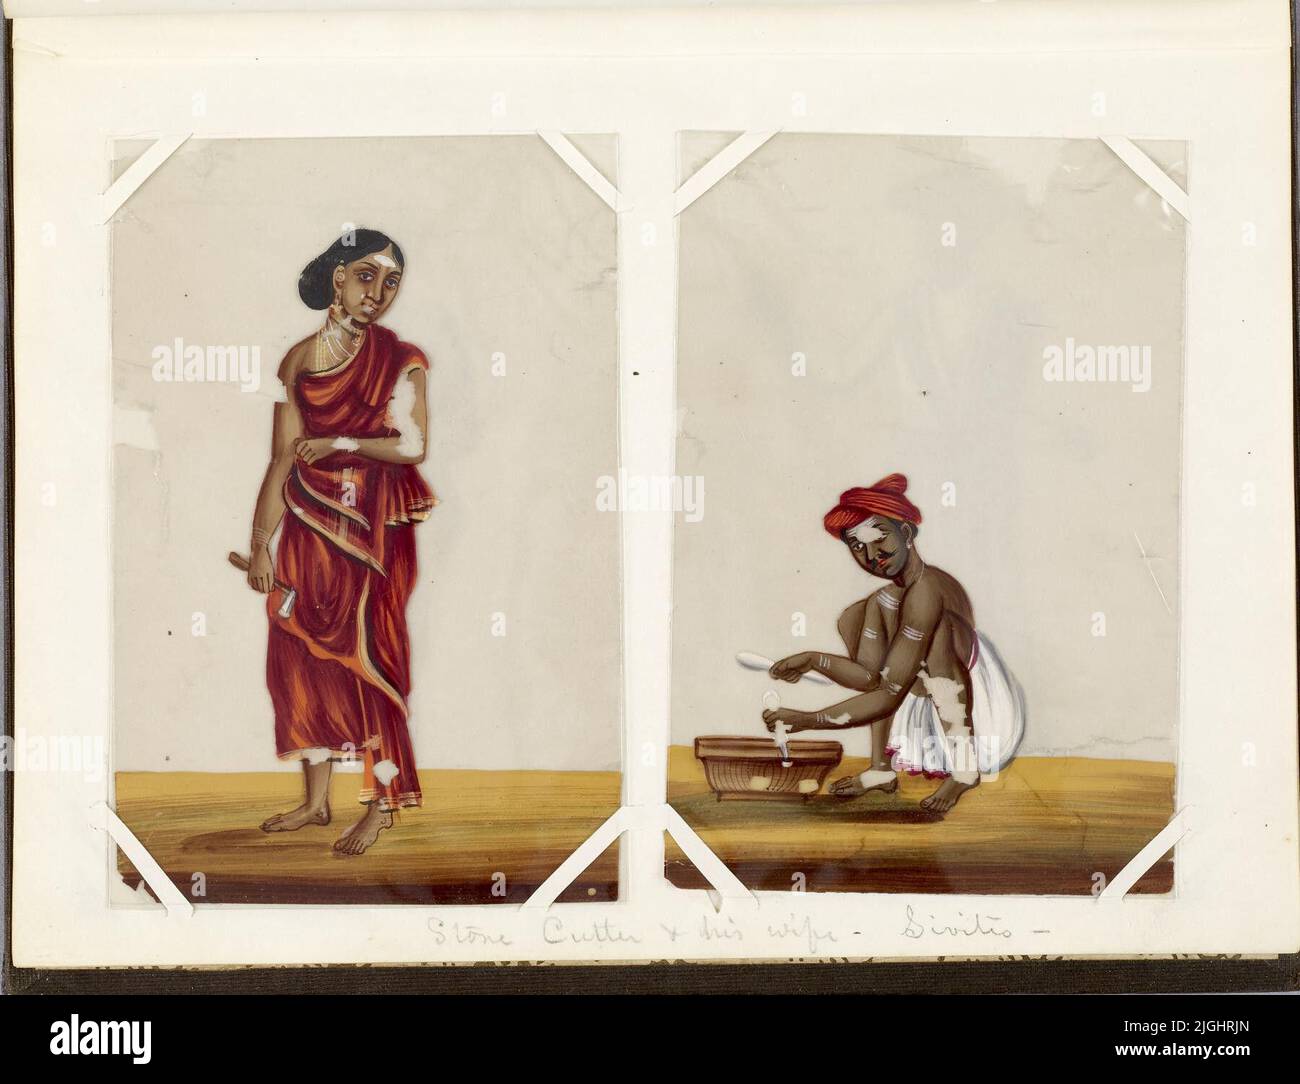 India, Village life Indian, Leaf from Bound Collection of 20 Miniatures Depicting Village Life, 1870, paint on mica, H: 7 7/8 x W: 6 5/16 in. (20 x 16 cm), Stock Photo